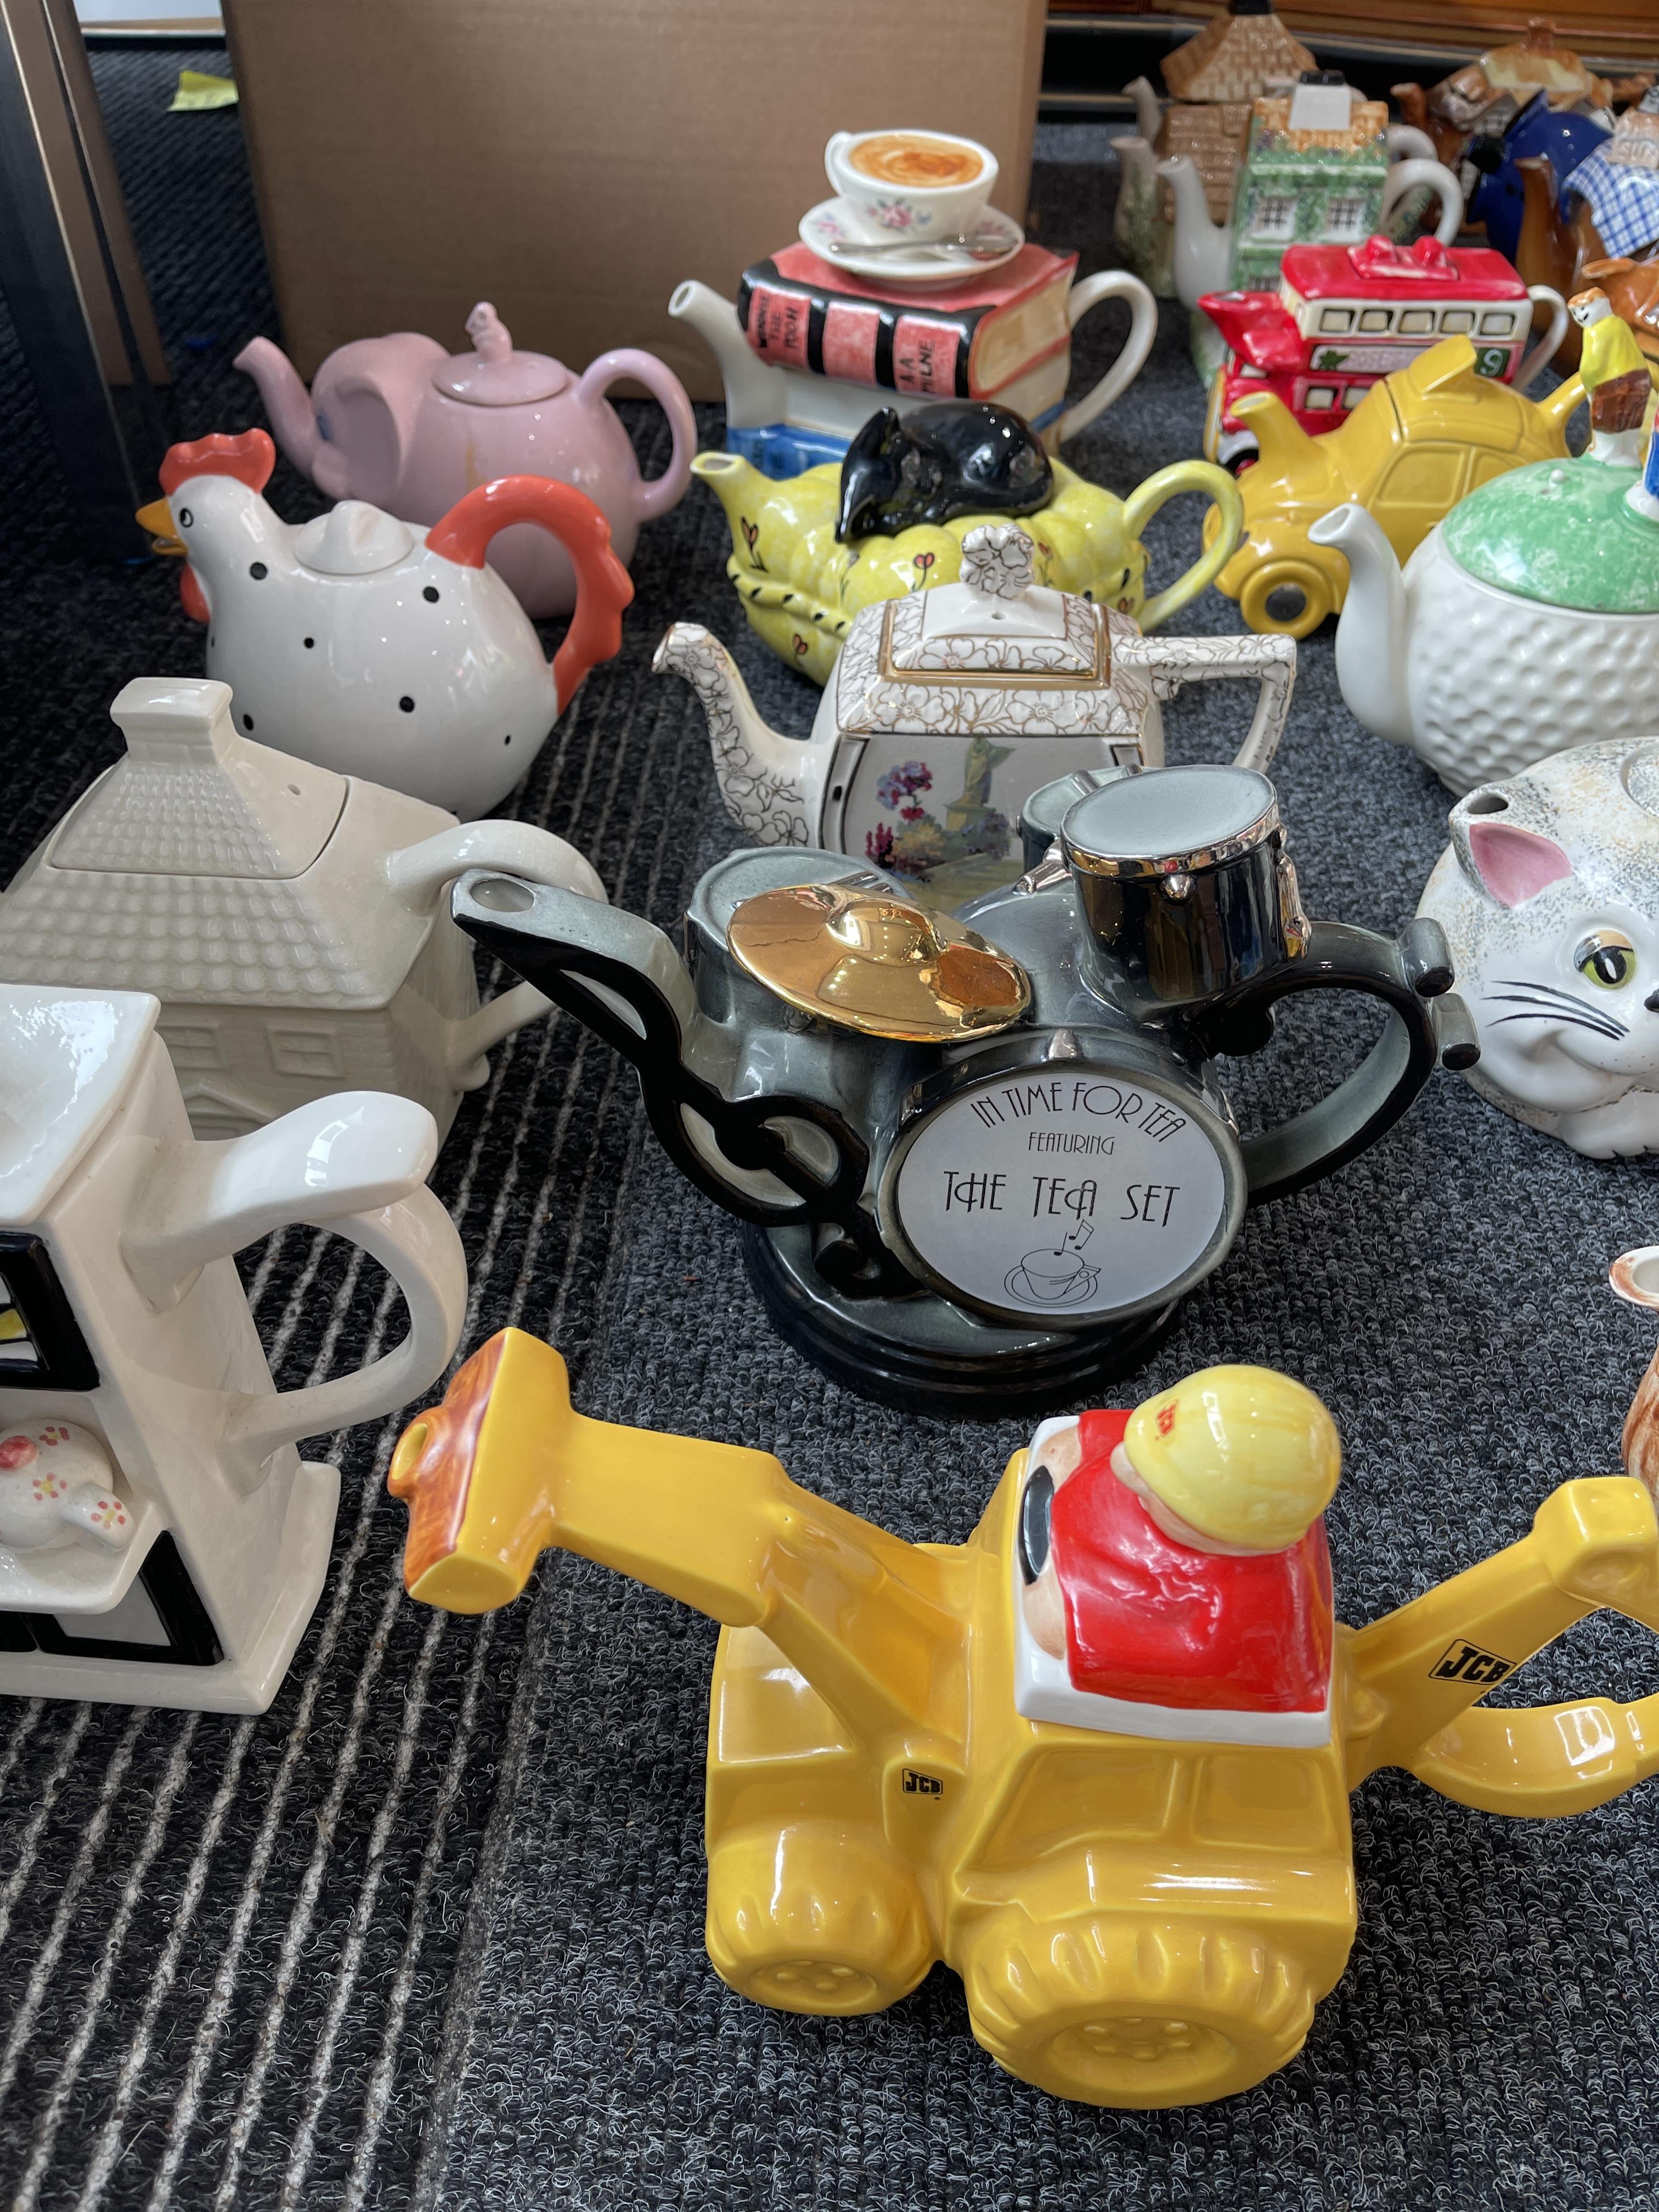 Collection of Ceramic Tea Pots - Image 16 of 44